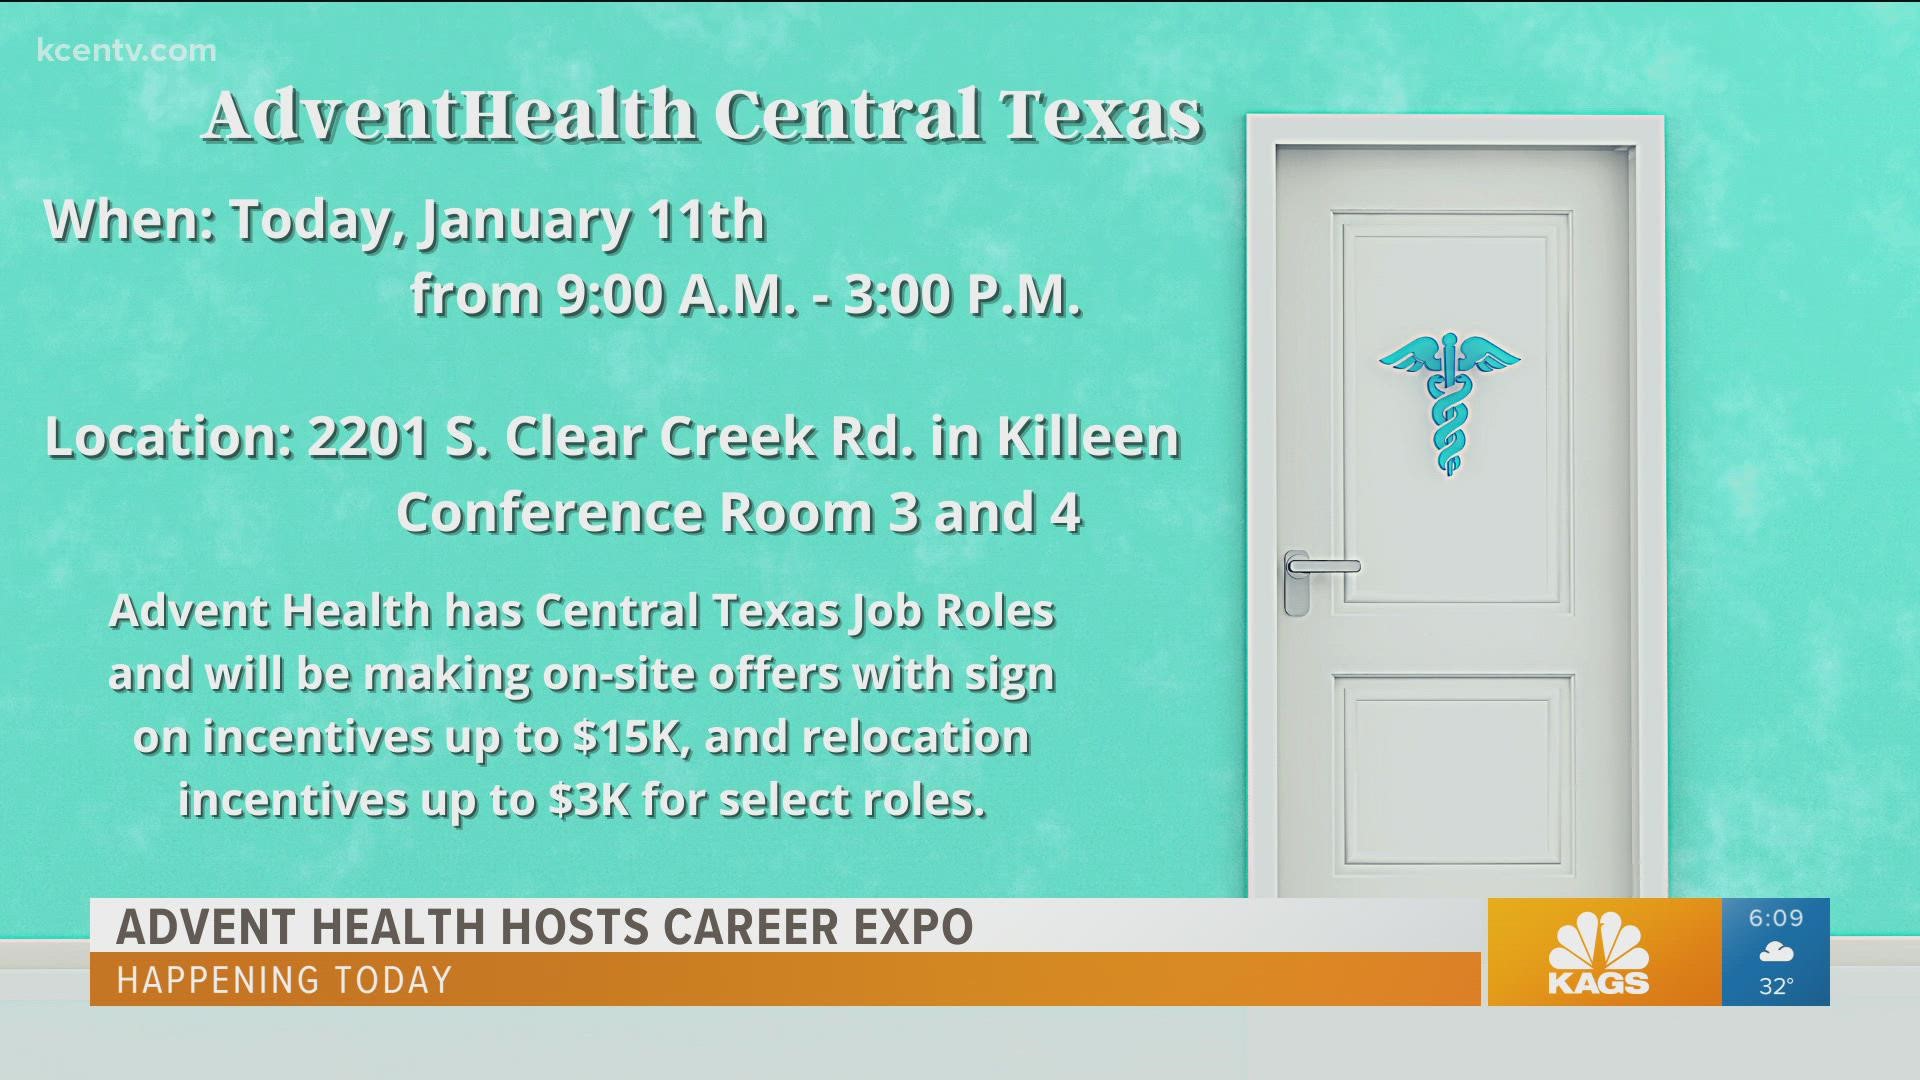 Advent Health Central Texas is looking to hire positions as early as today and some with a sign-on bonus.